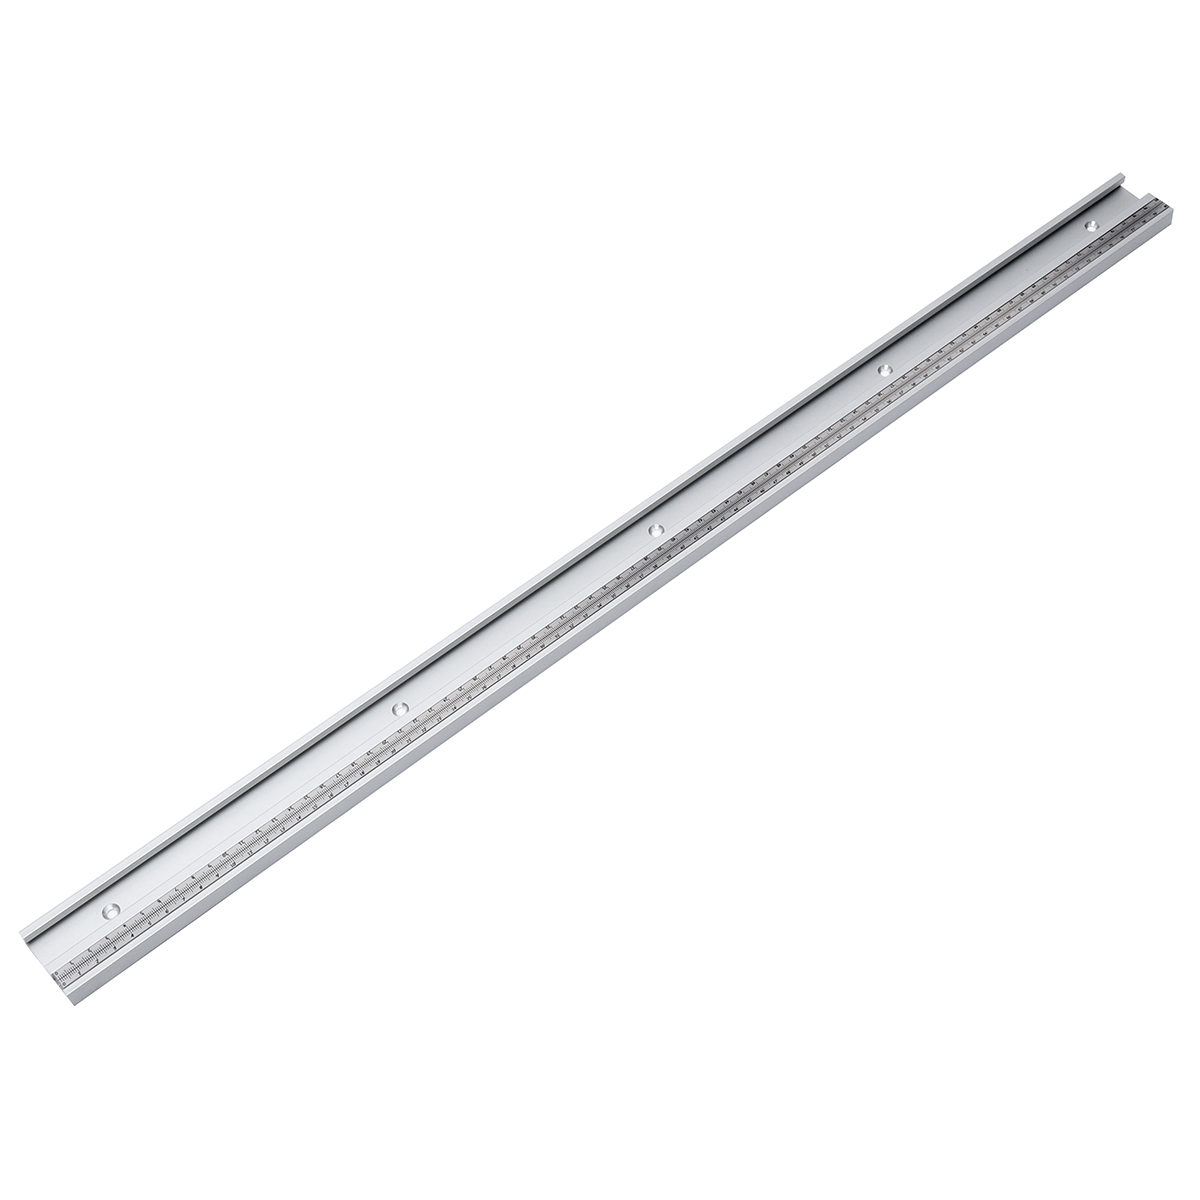 400-1220mm-Aluminum-Alloy-T-Track-T-slot-Miter-Track-with-Slide-Metric-Ruler-Scale-for-Table-Saw-Rou-1462377-4